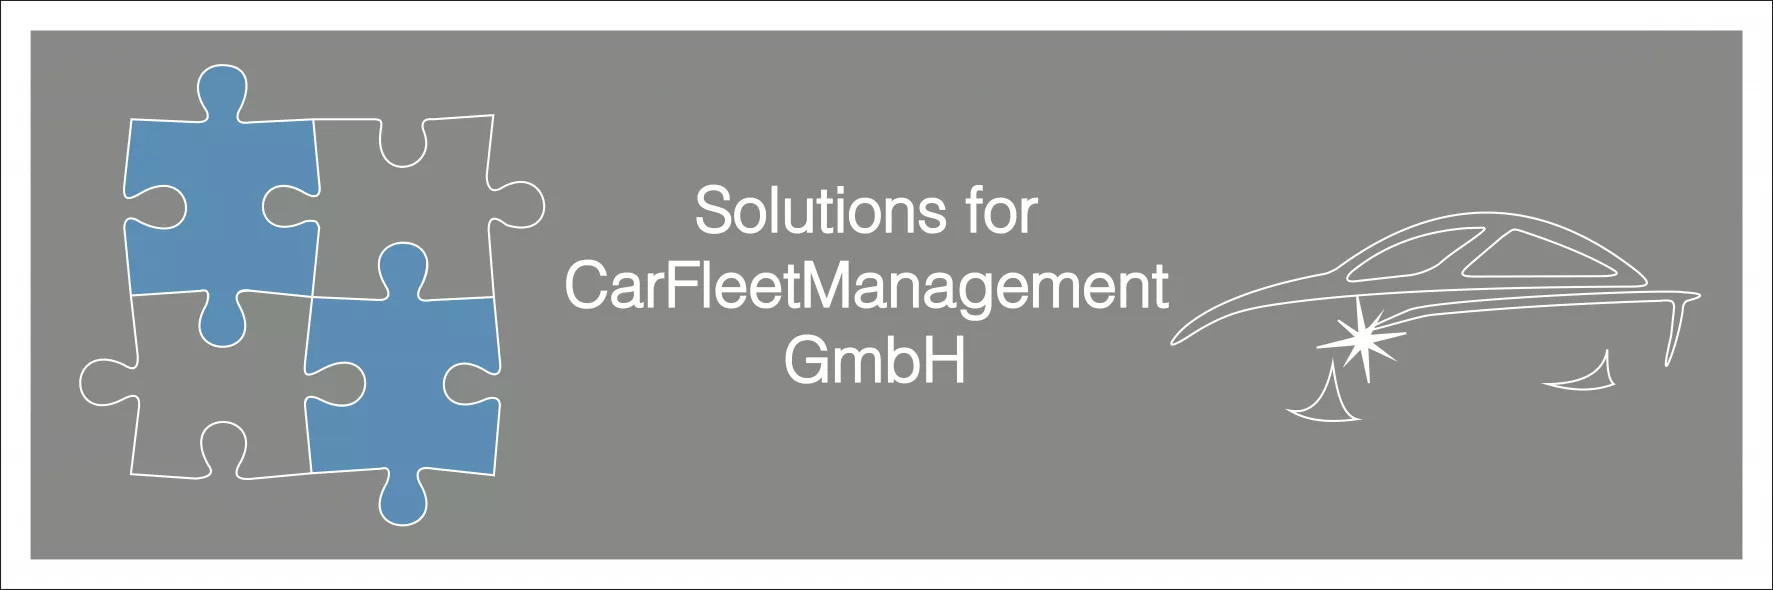 SOLUTIONS for CarFleetManagement GmbH